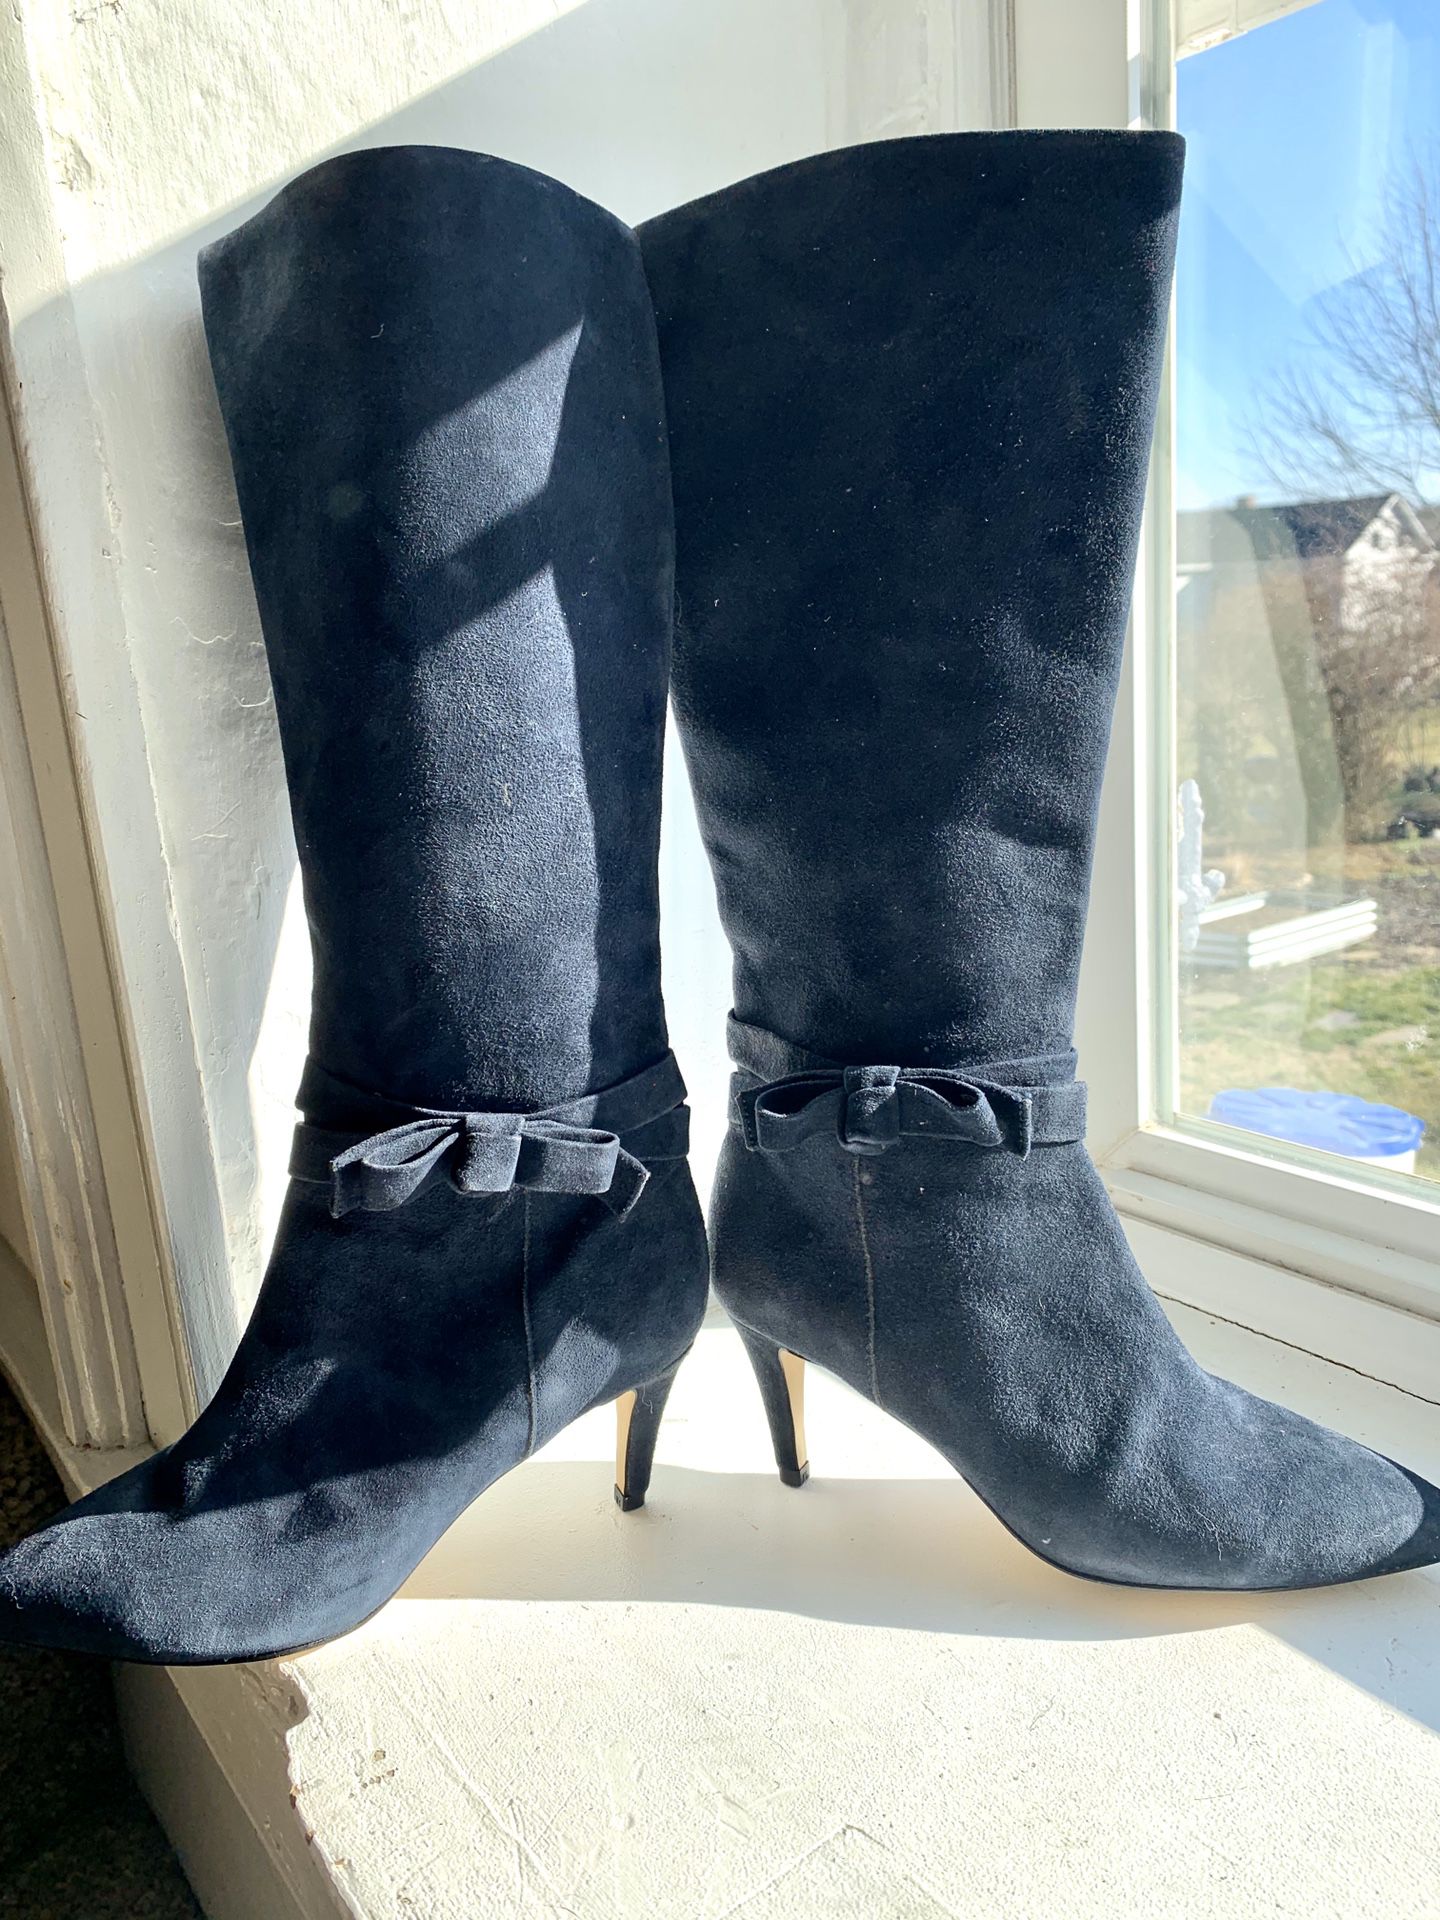 NWOB!! Kate Spade Tall Suede Boots 7 1/2